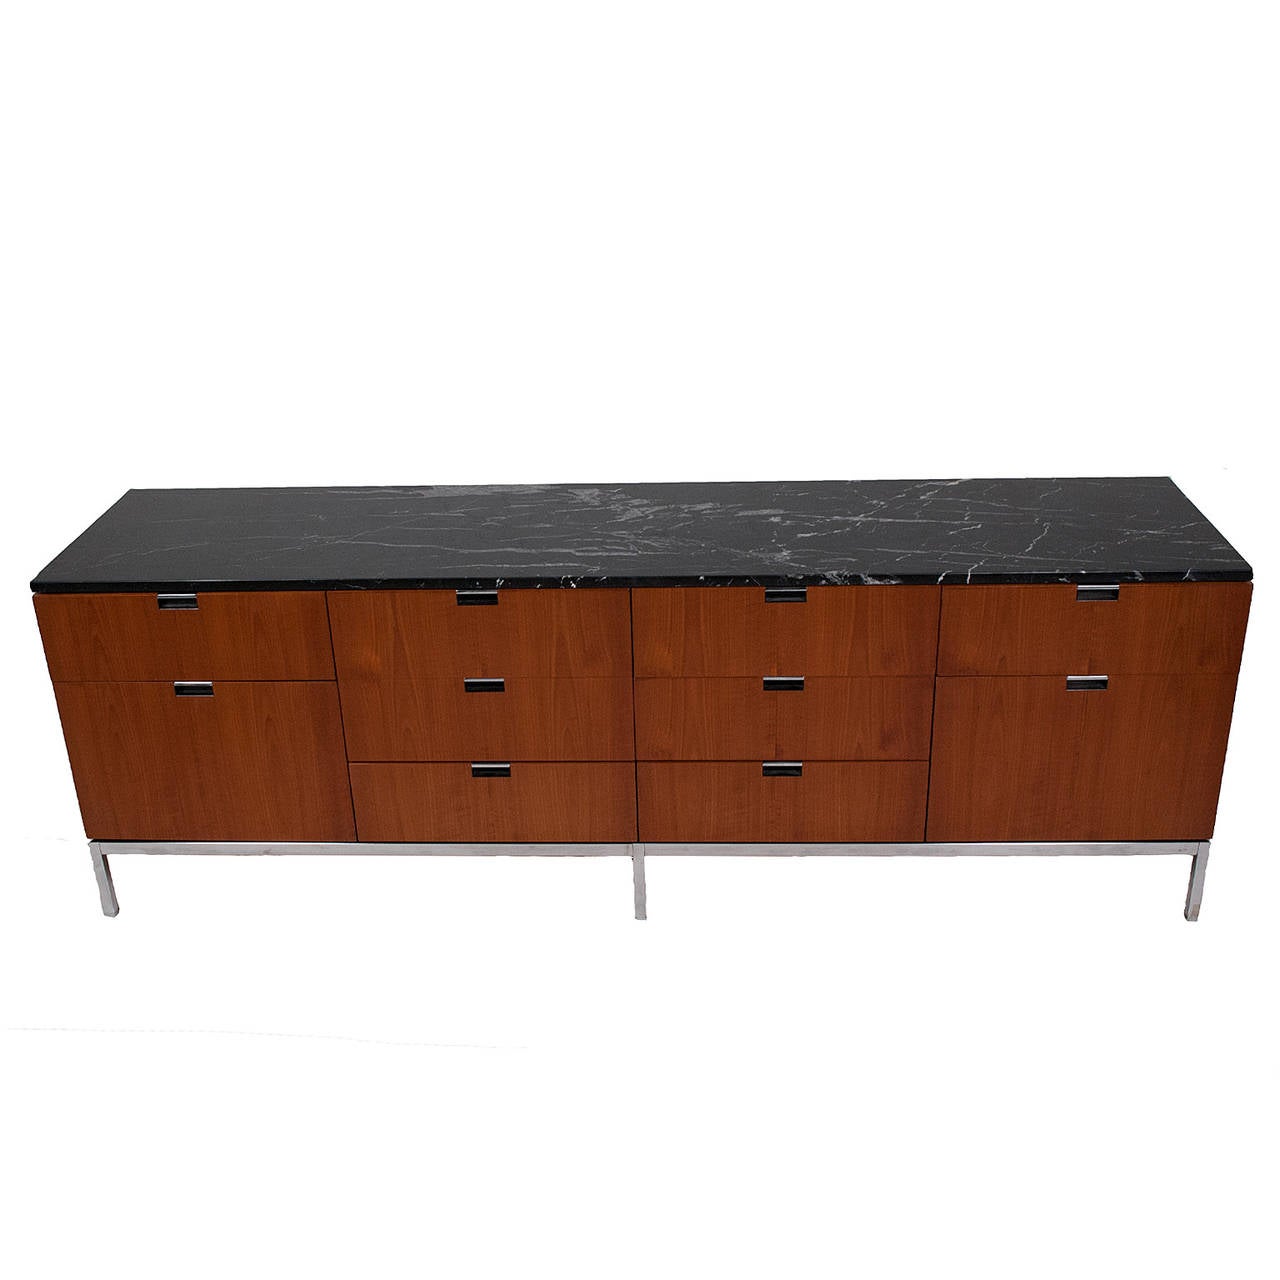 American Executive Credenza Model 2543M by Florence Knoll